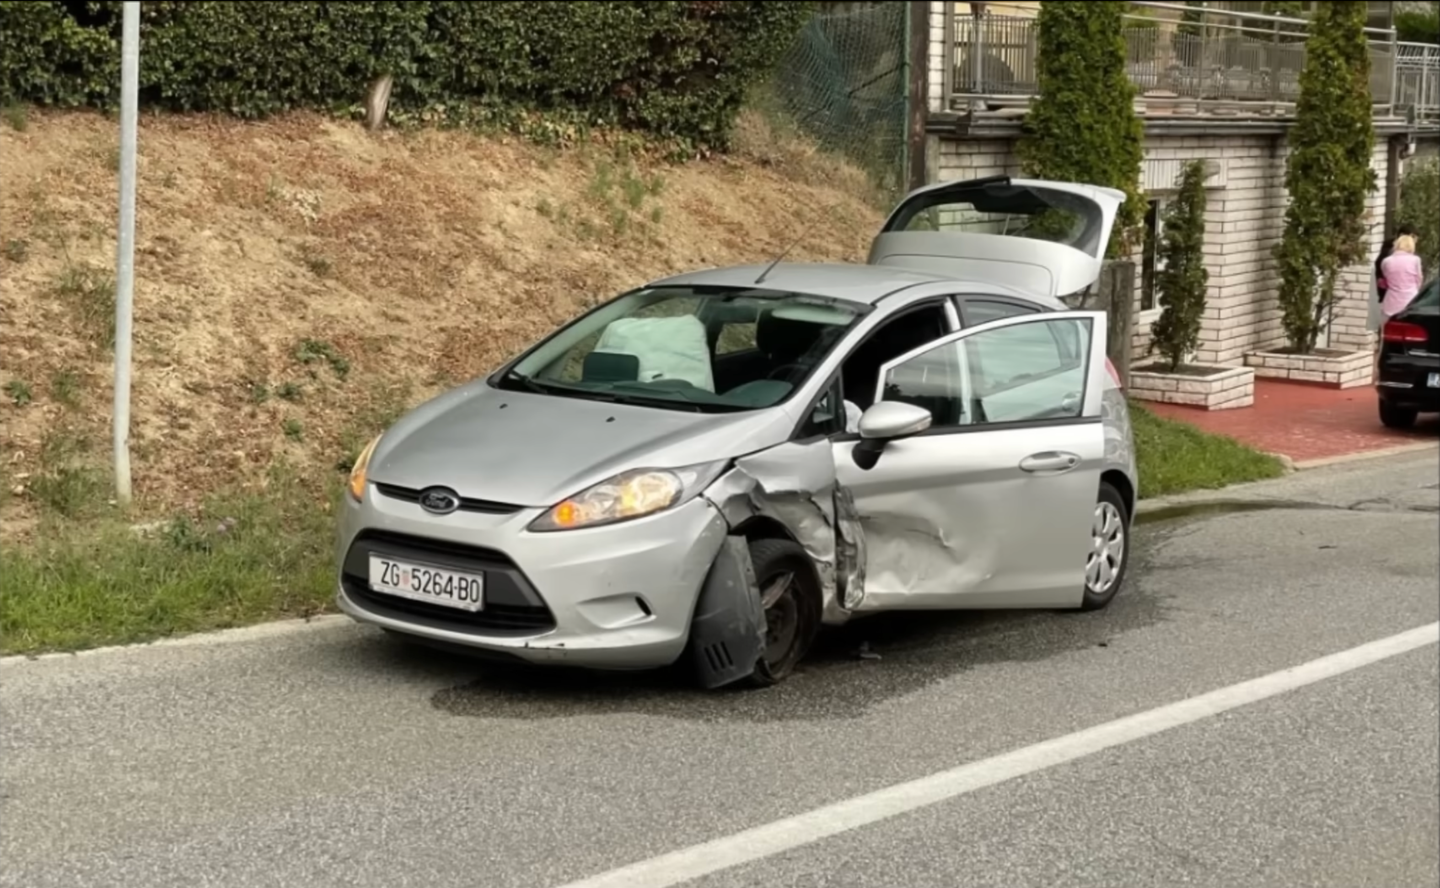 The damage done to the Ford Fiesta. <em>Youtube screengrab</em>